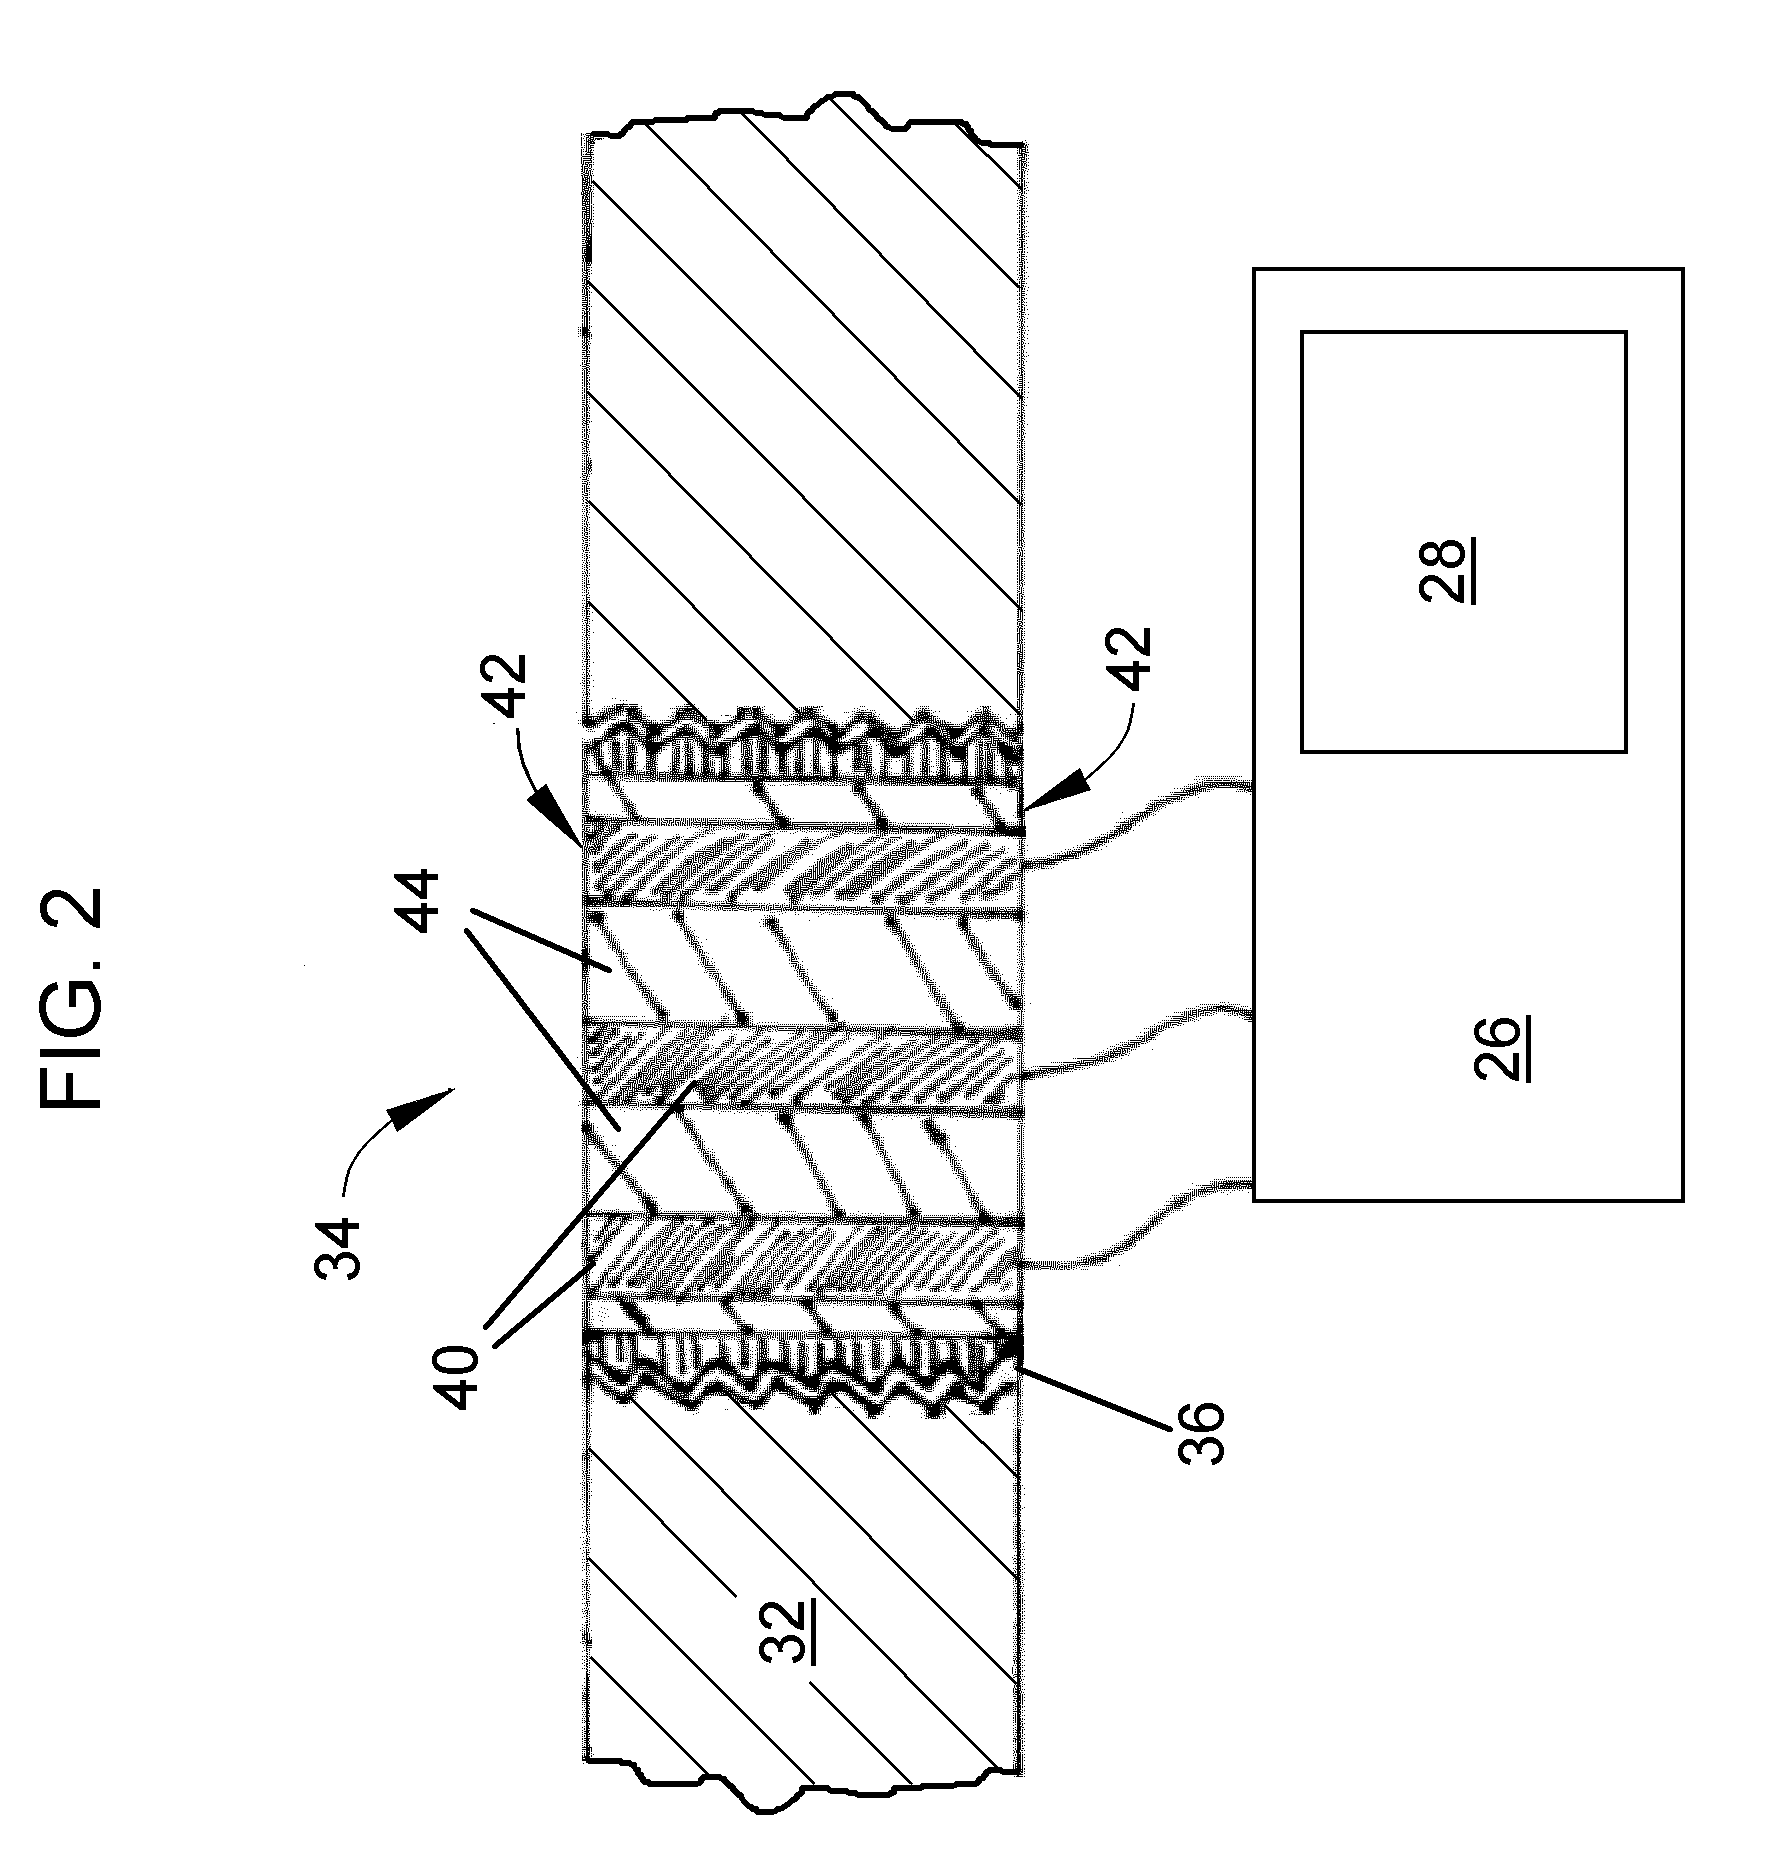 System and method for online monitoring of corrosion of gas turbine components